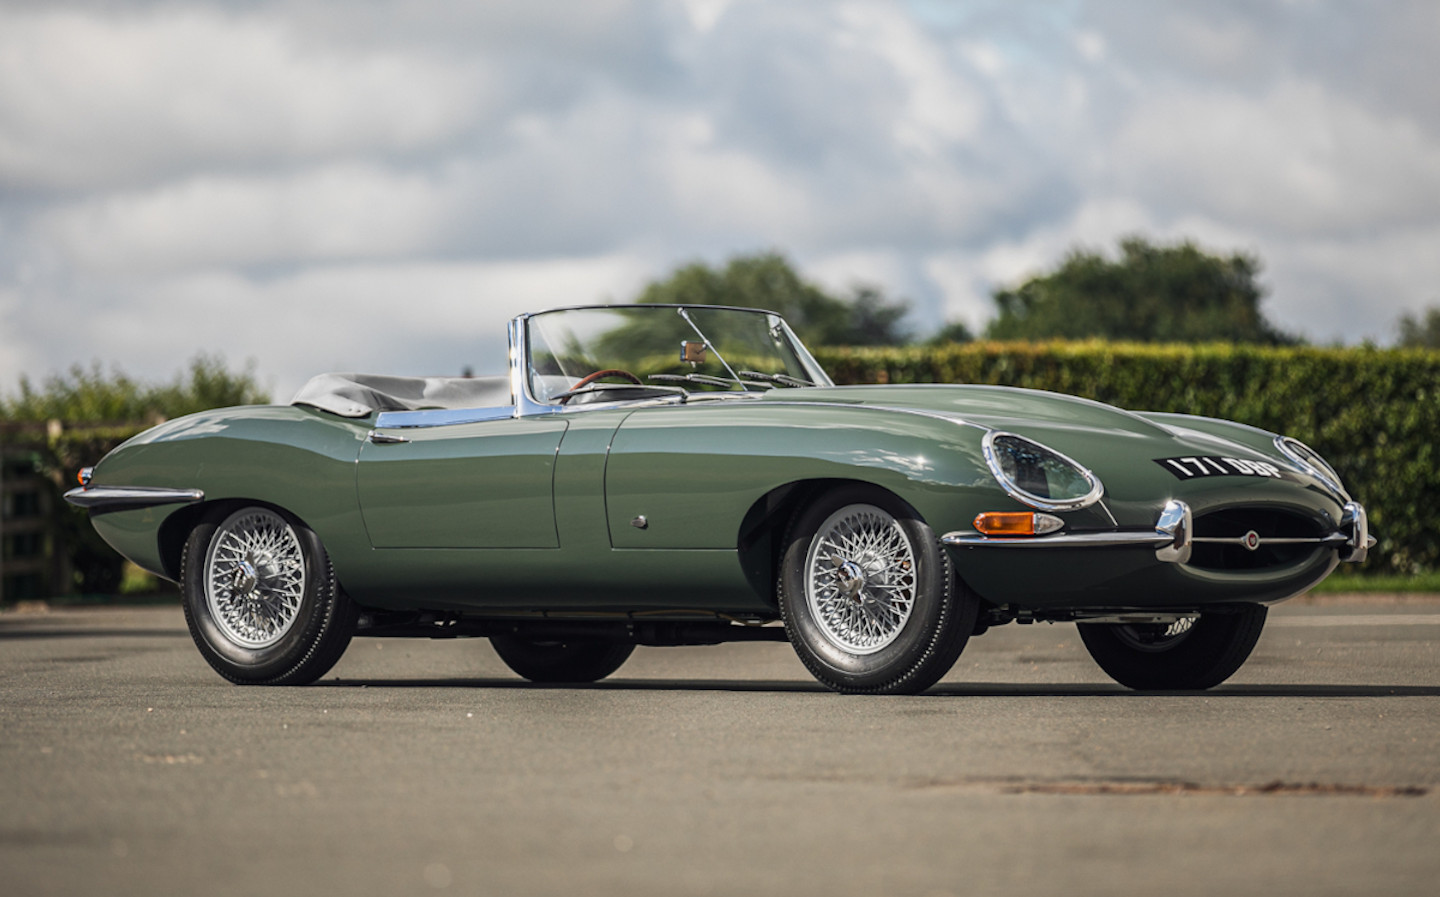 Rare E-Type owned by Steve Coogan up for sale